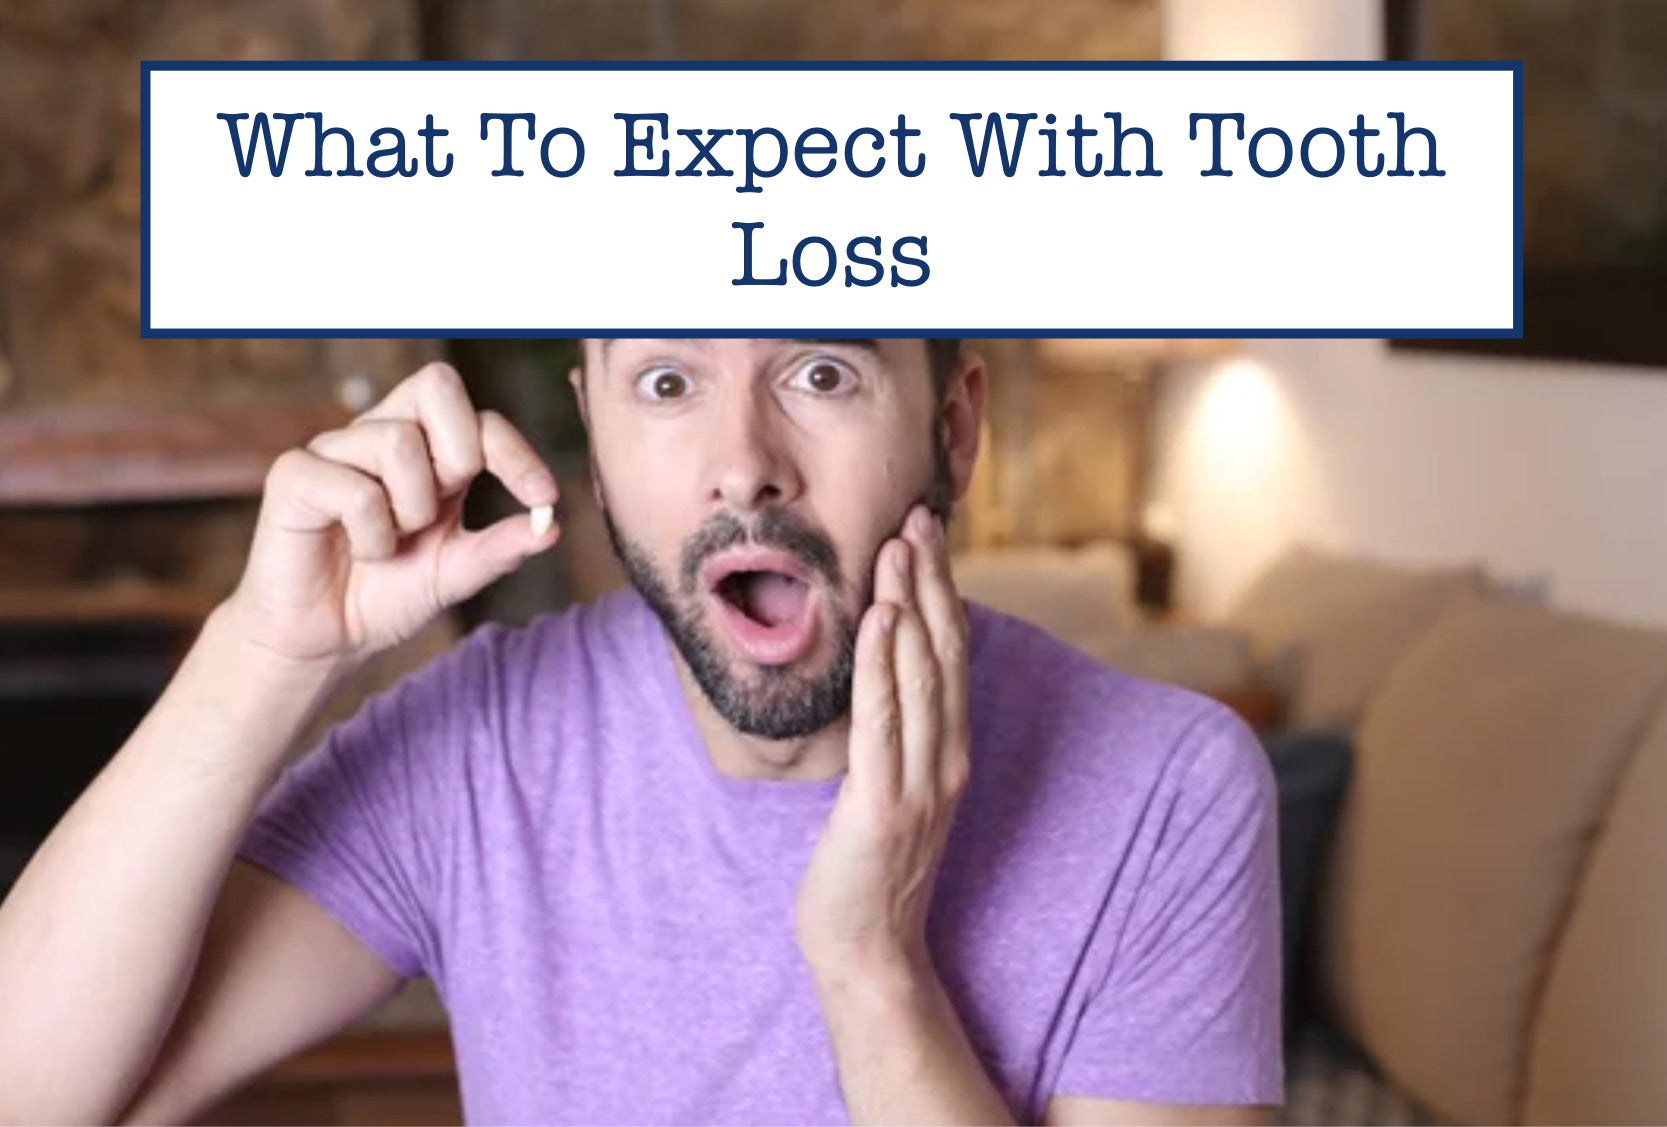 What To Expect With Tooth Loss